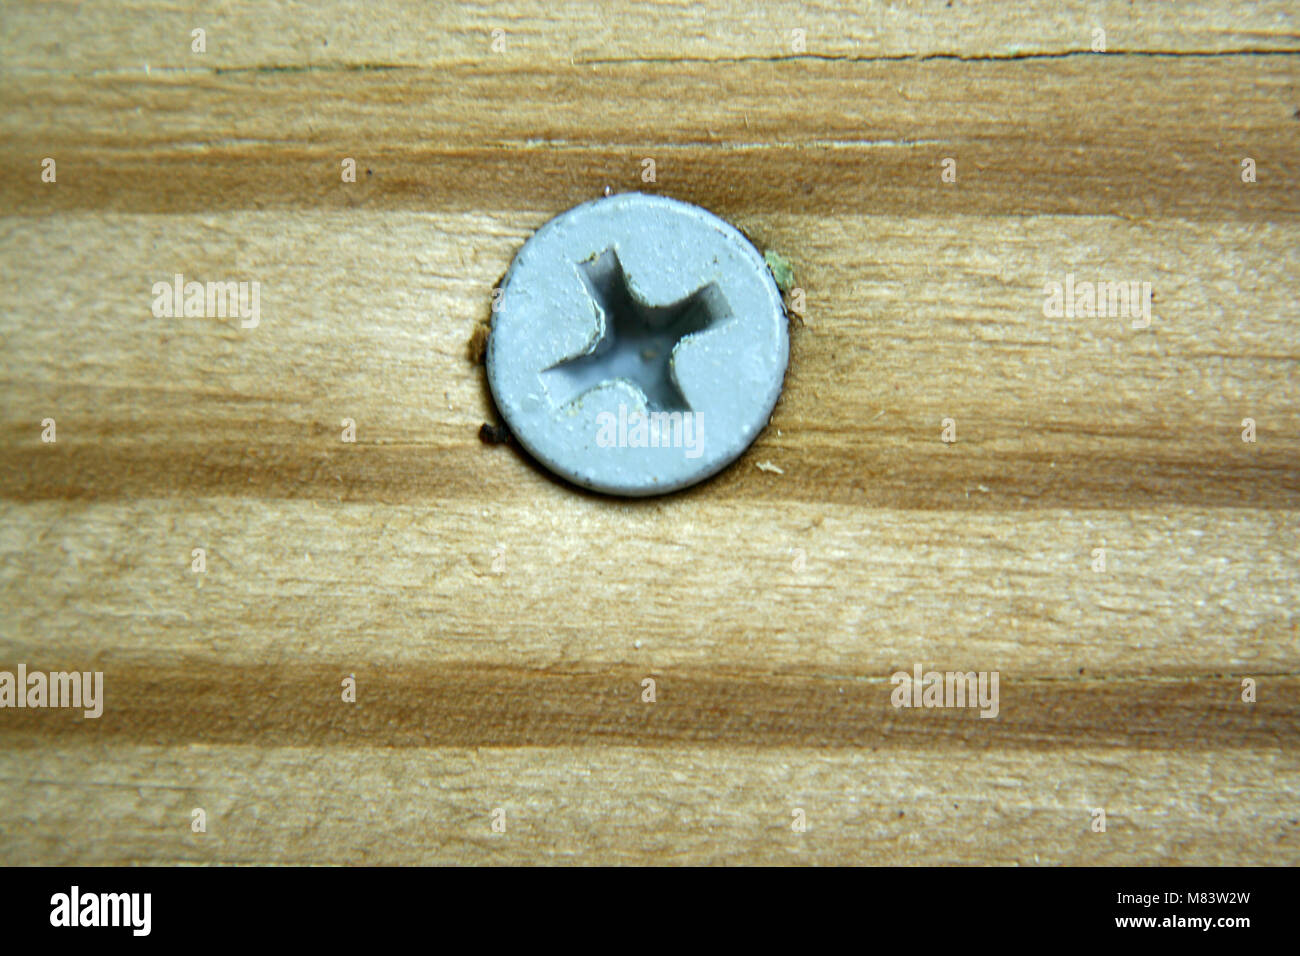 New Wood Screw in a new piece of pressure treated wood. Stock Photo